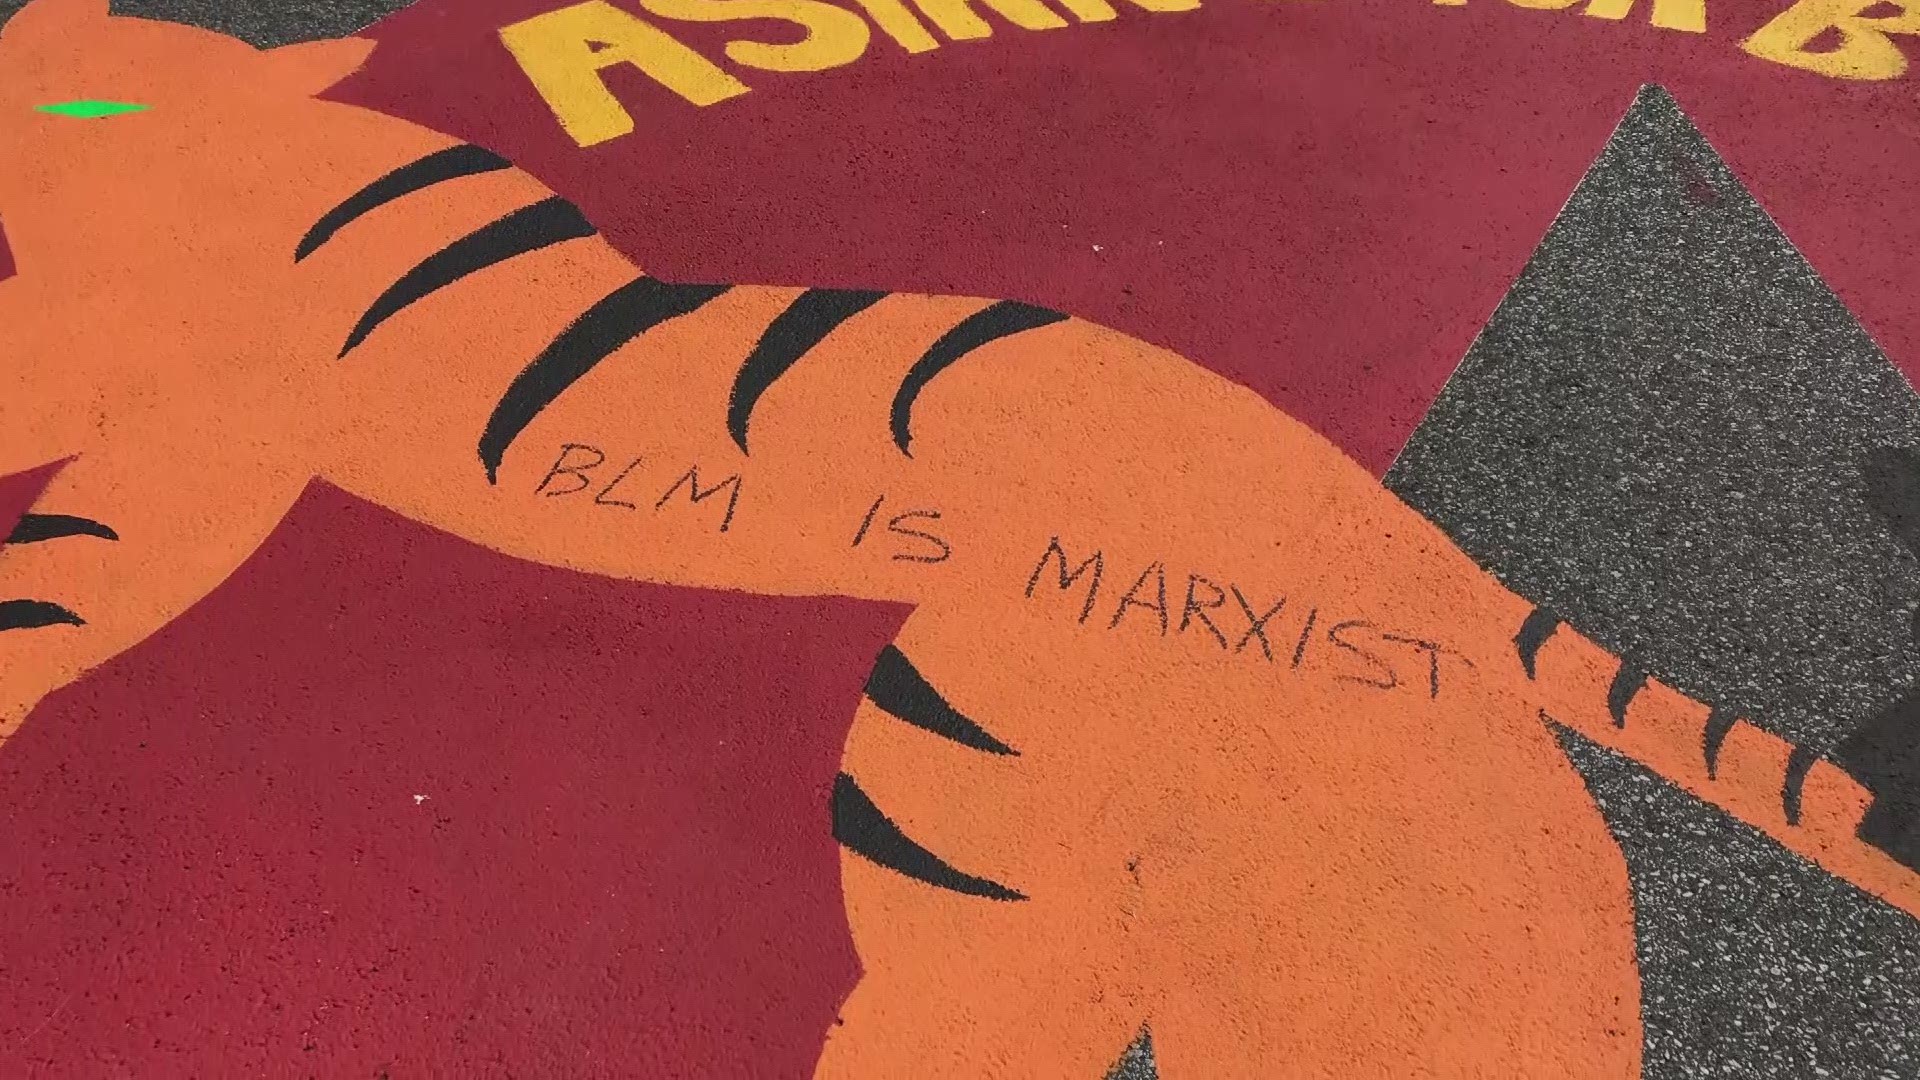 3News captured images of the vandalism Tuesday morning that shows the words "BLM IS MARXIST" and "STOP KILLING EACH OTHER" were written on top of the street mural.